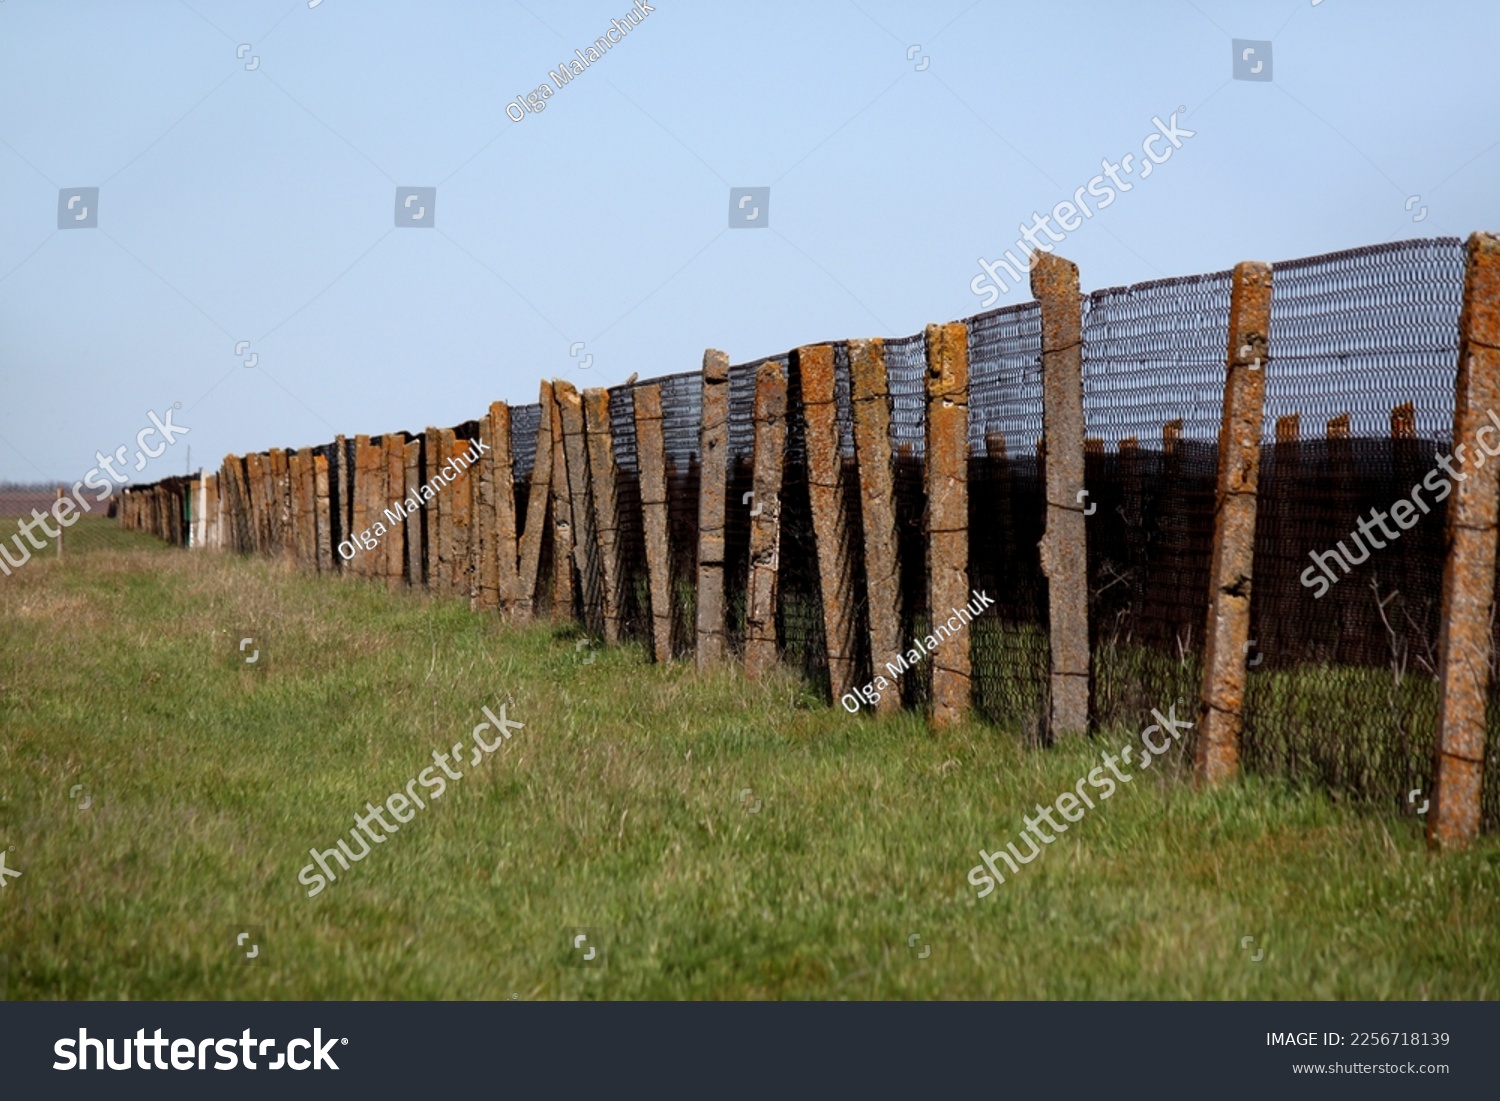 View of animal pen in field against green grass and blue sky #2256718139